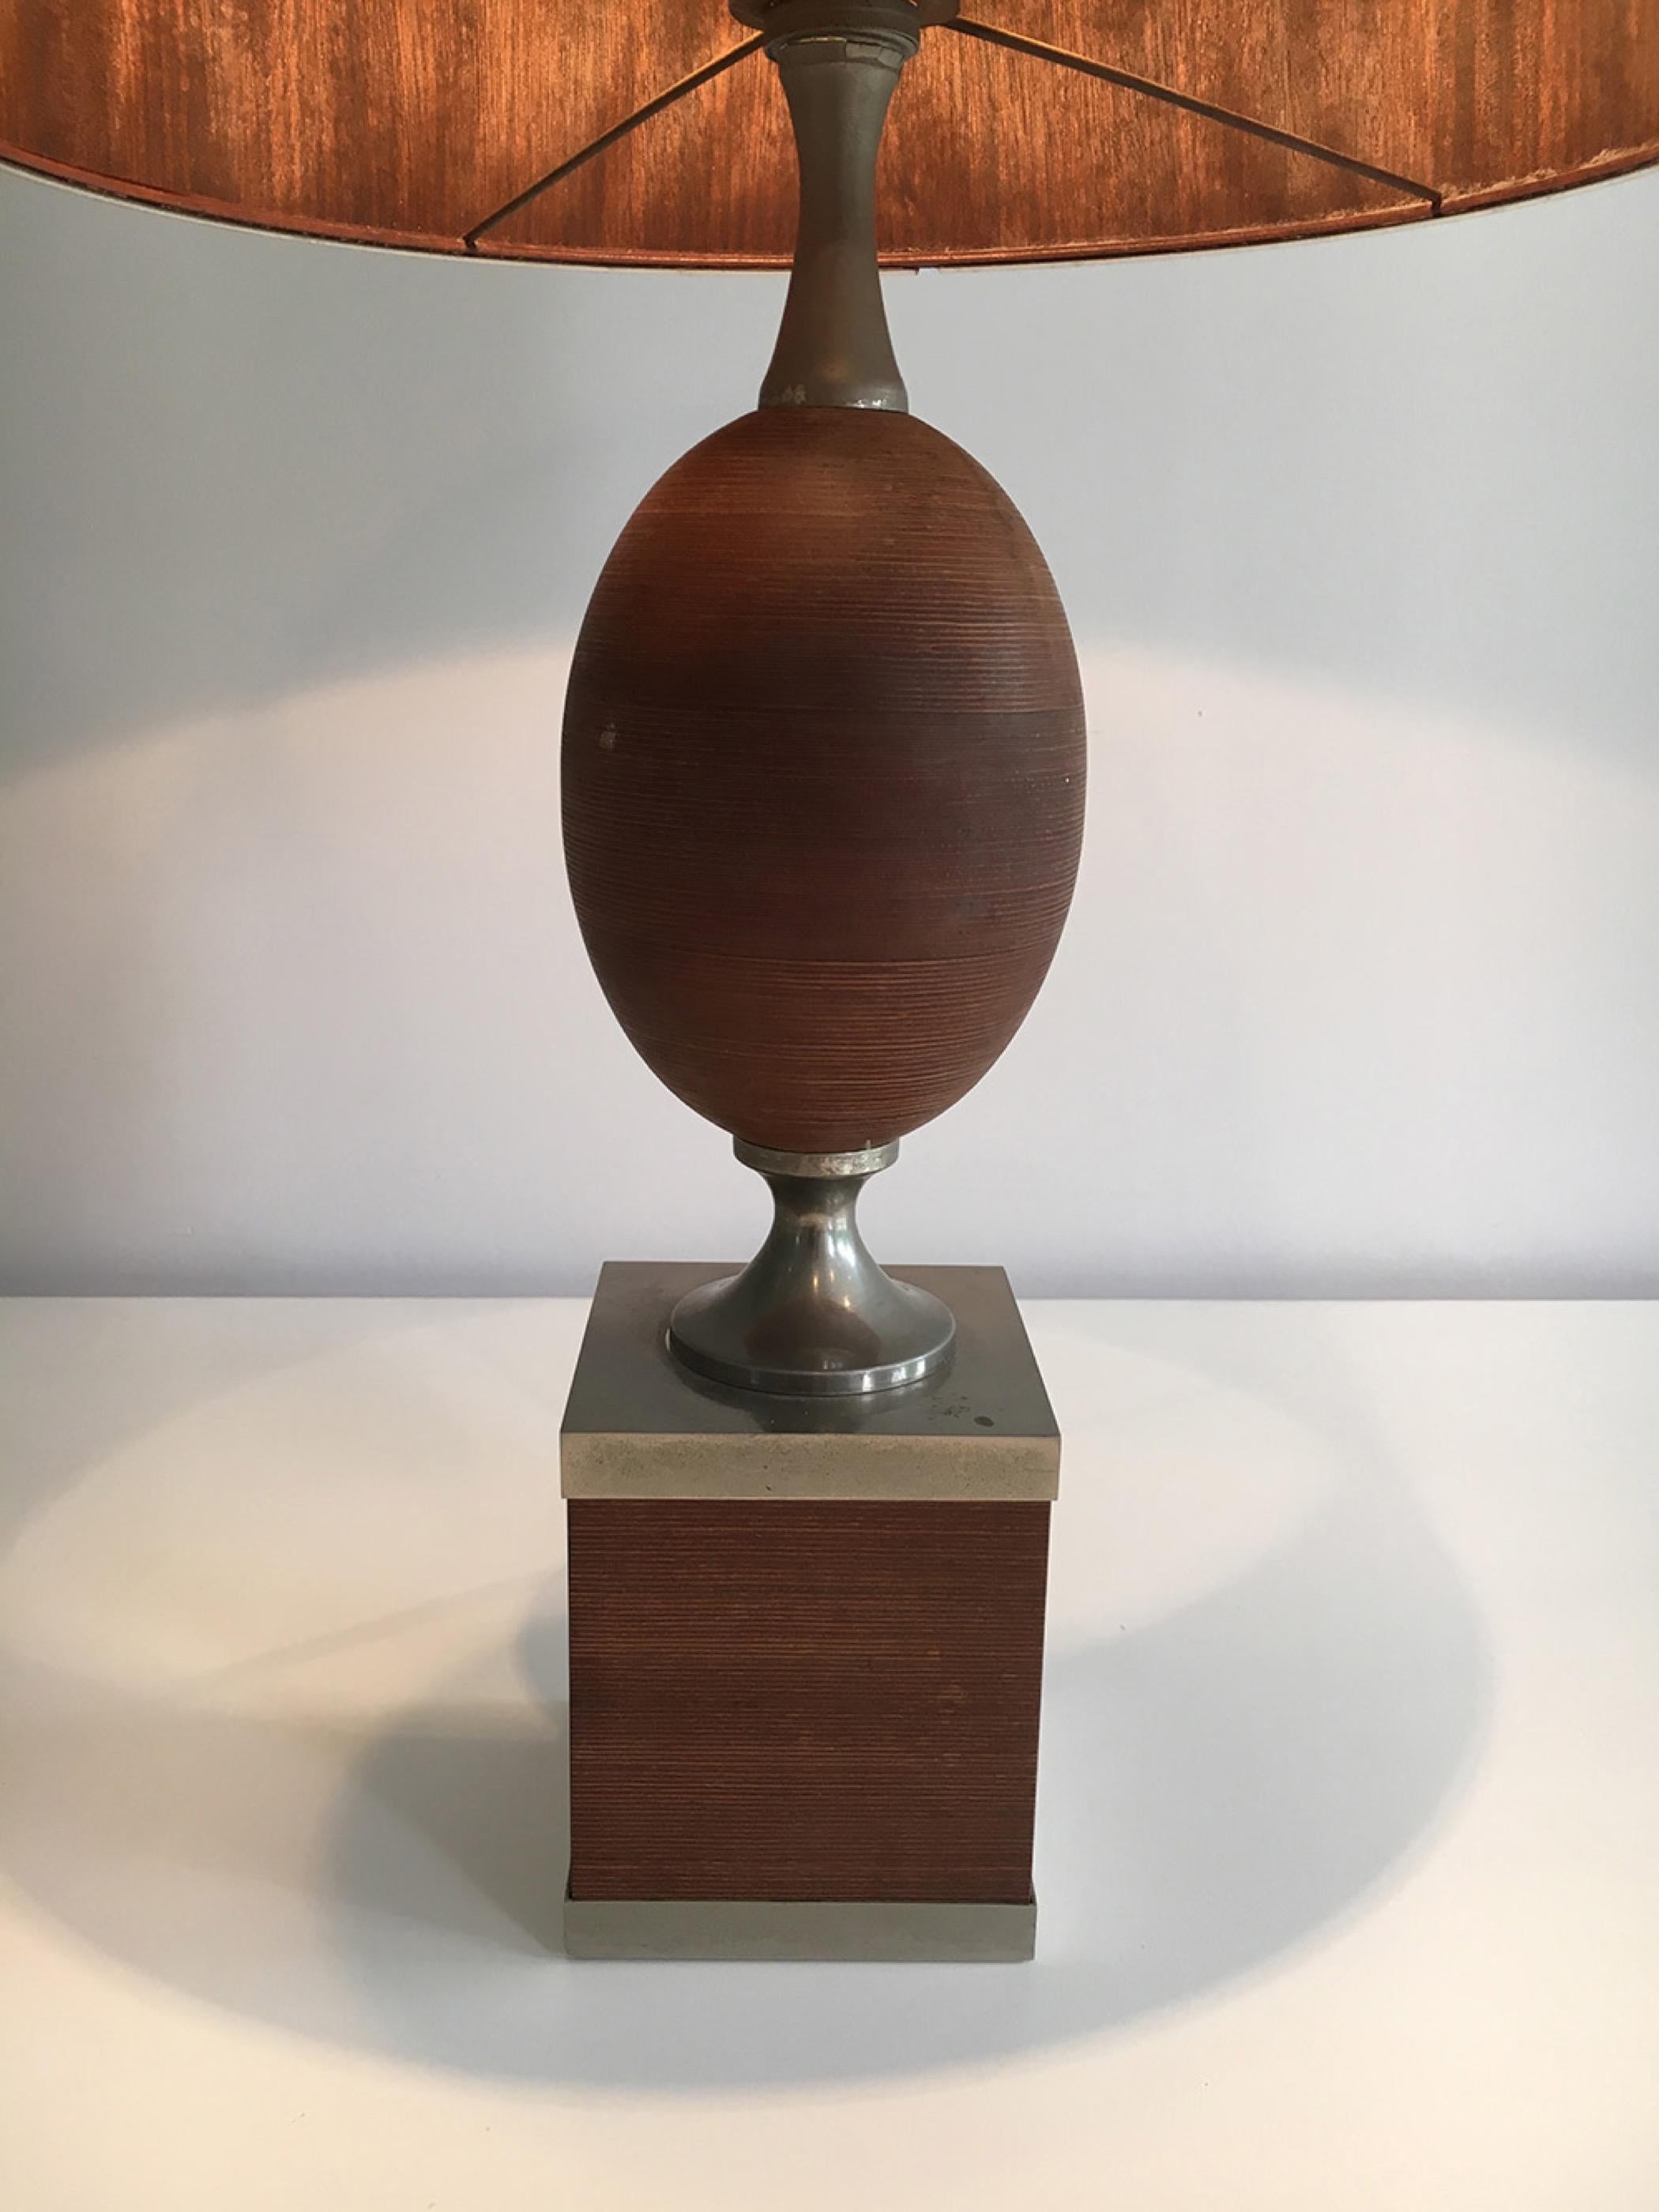 French Wood and Brushed Steel Egg Lamp with Wooden Shade, circa 1970 For Sale